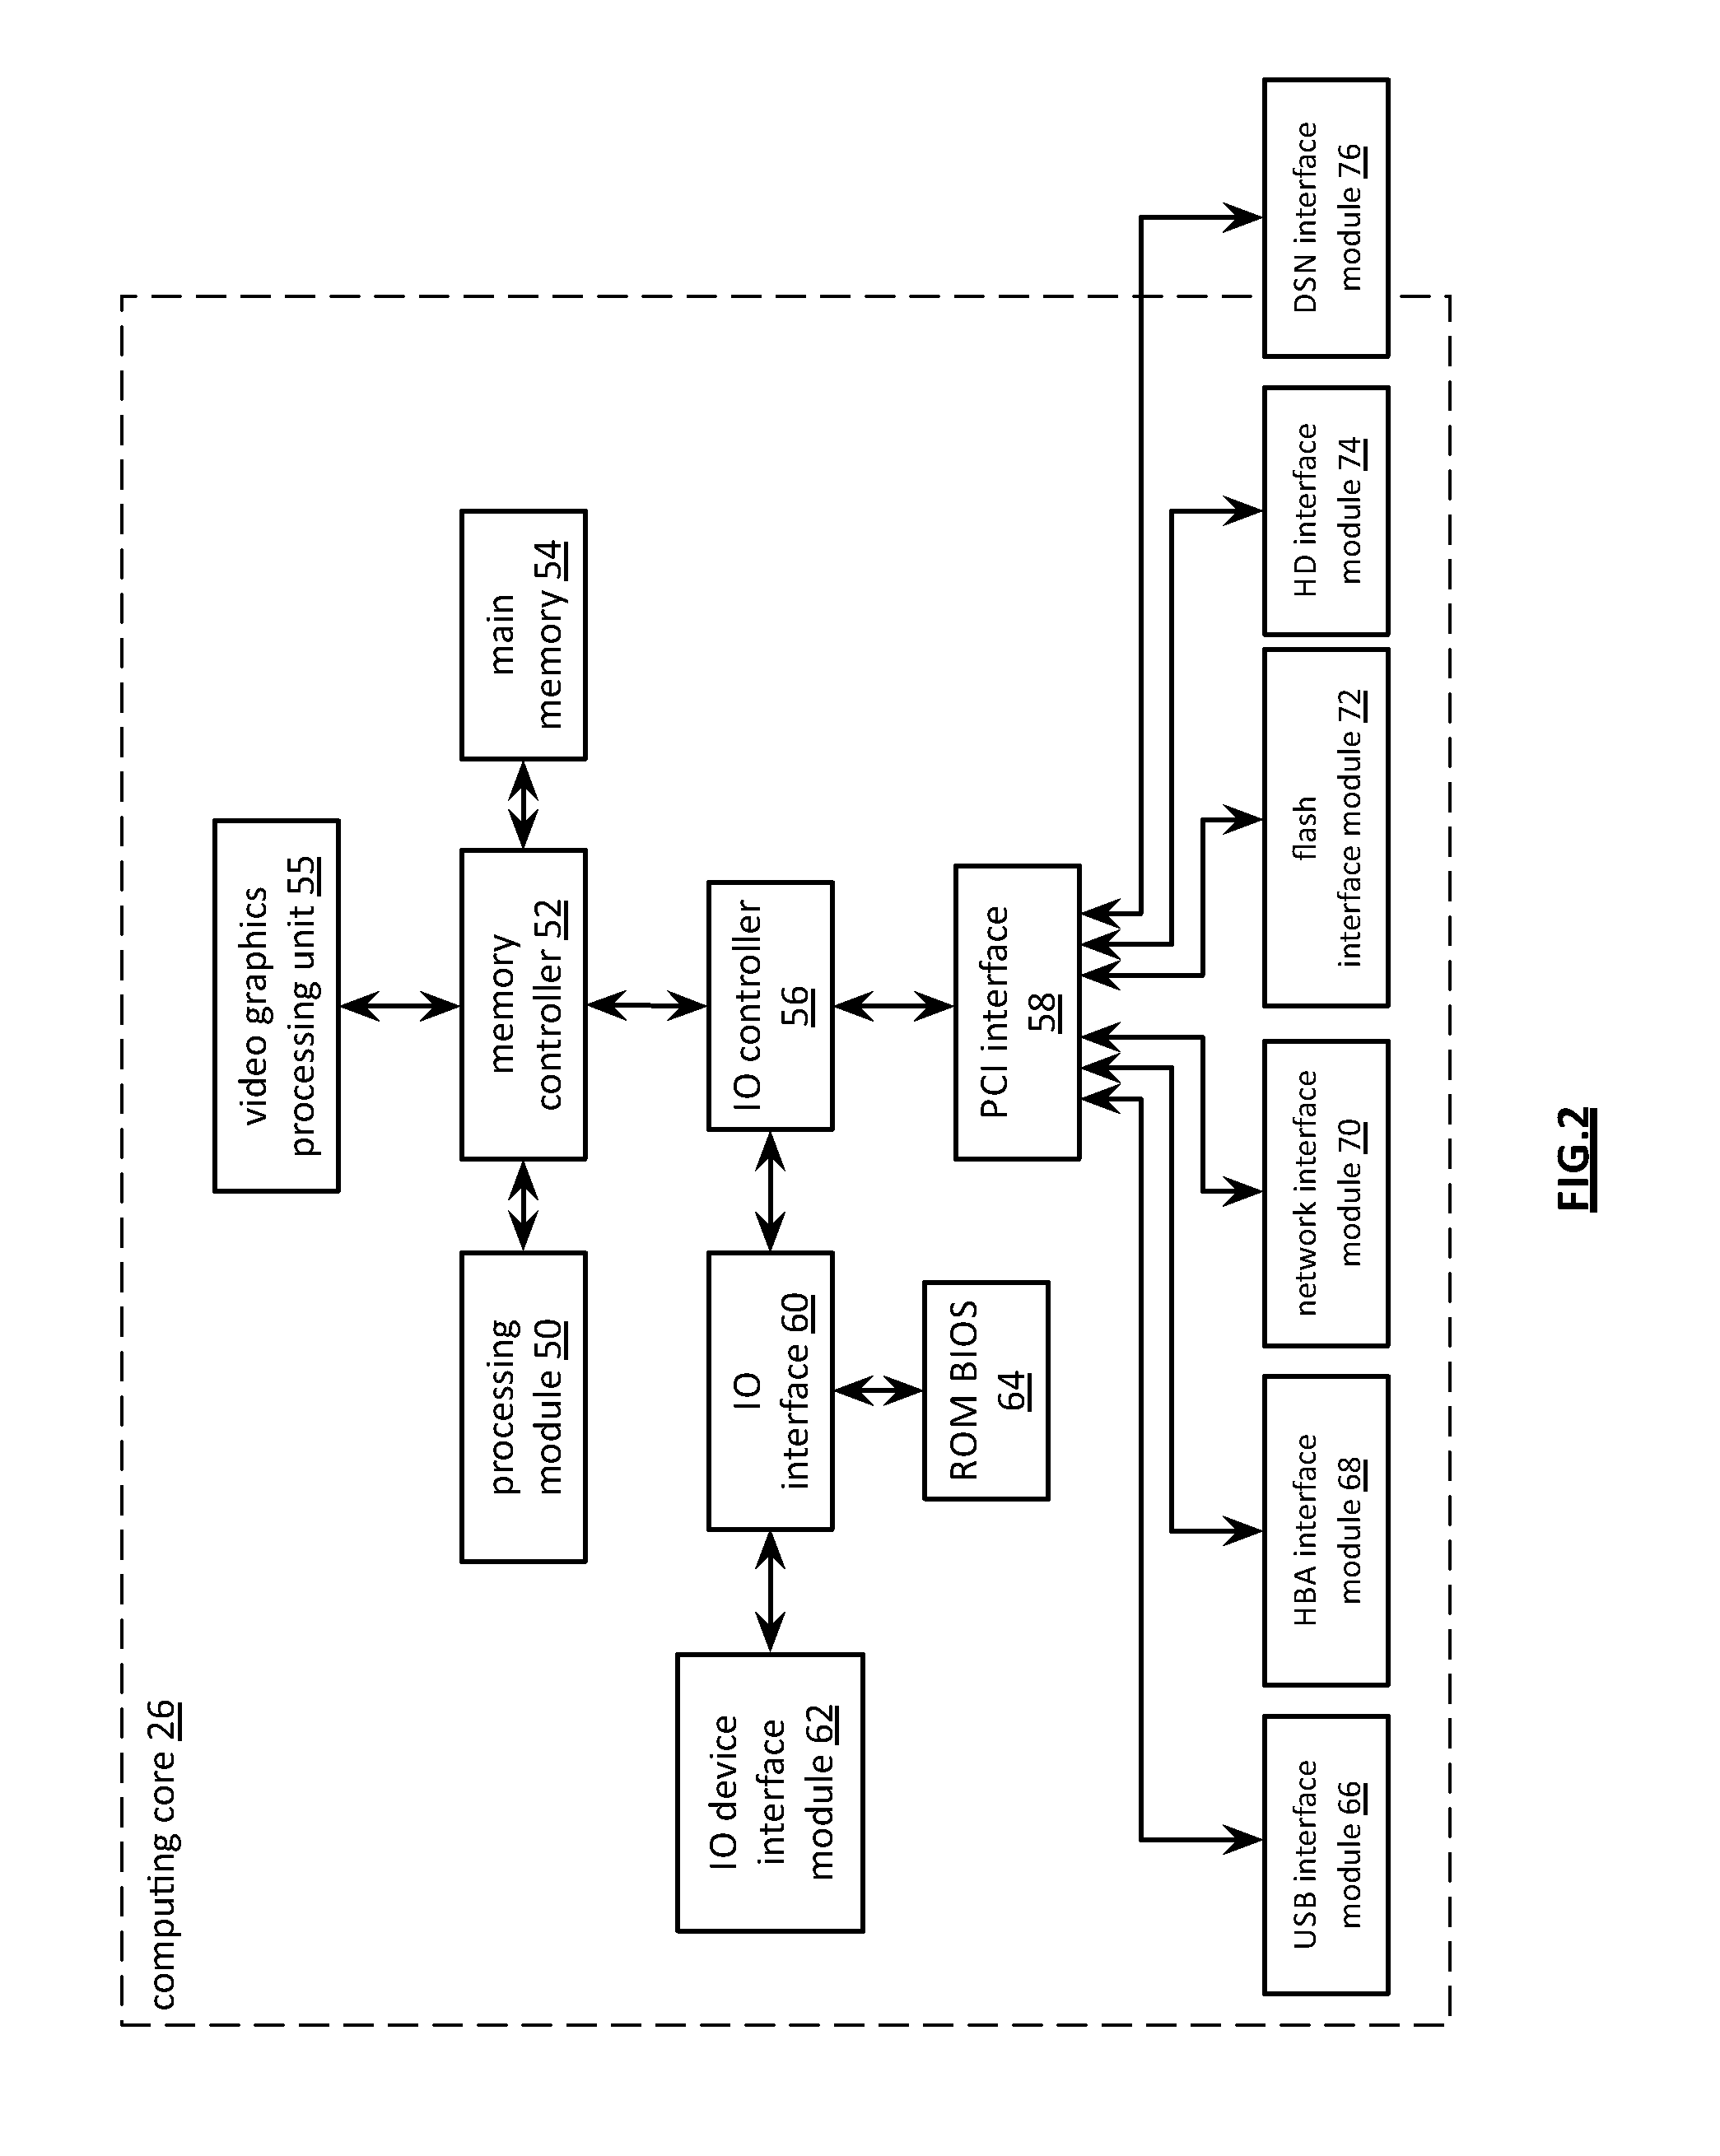 File retrieval during a legacy storage system to dispersed storage network migration